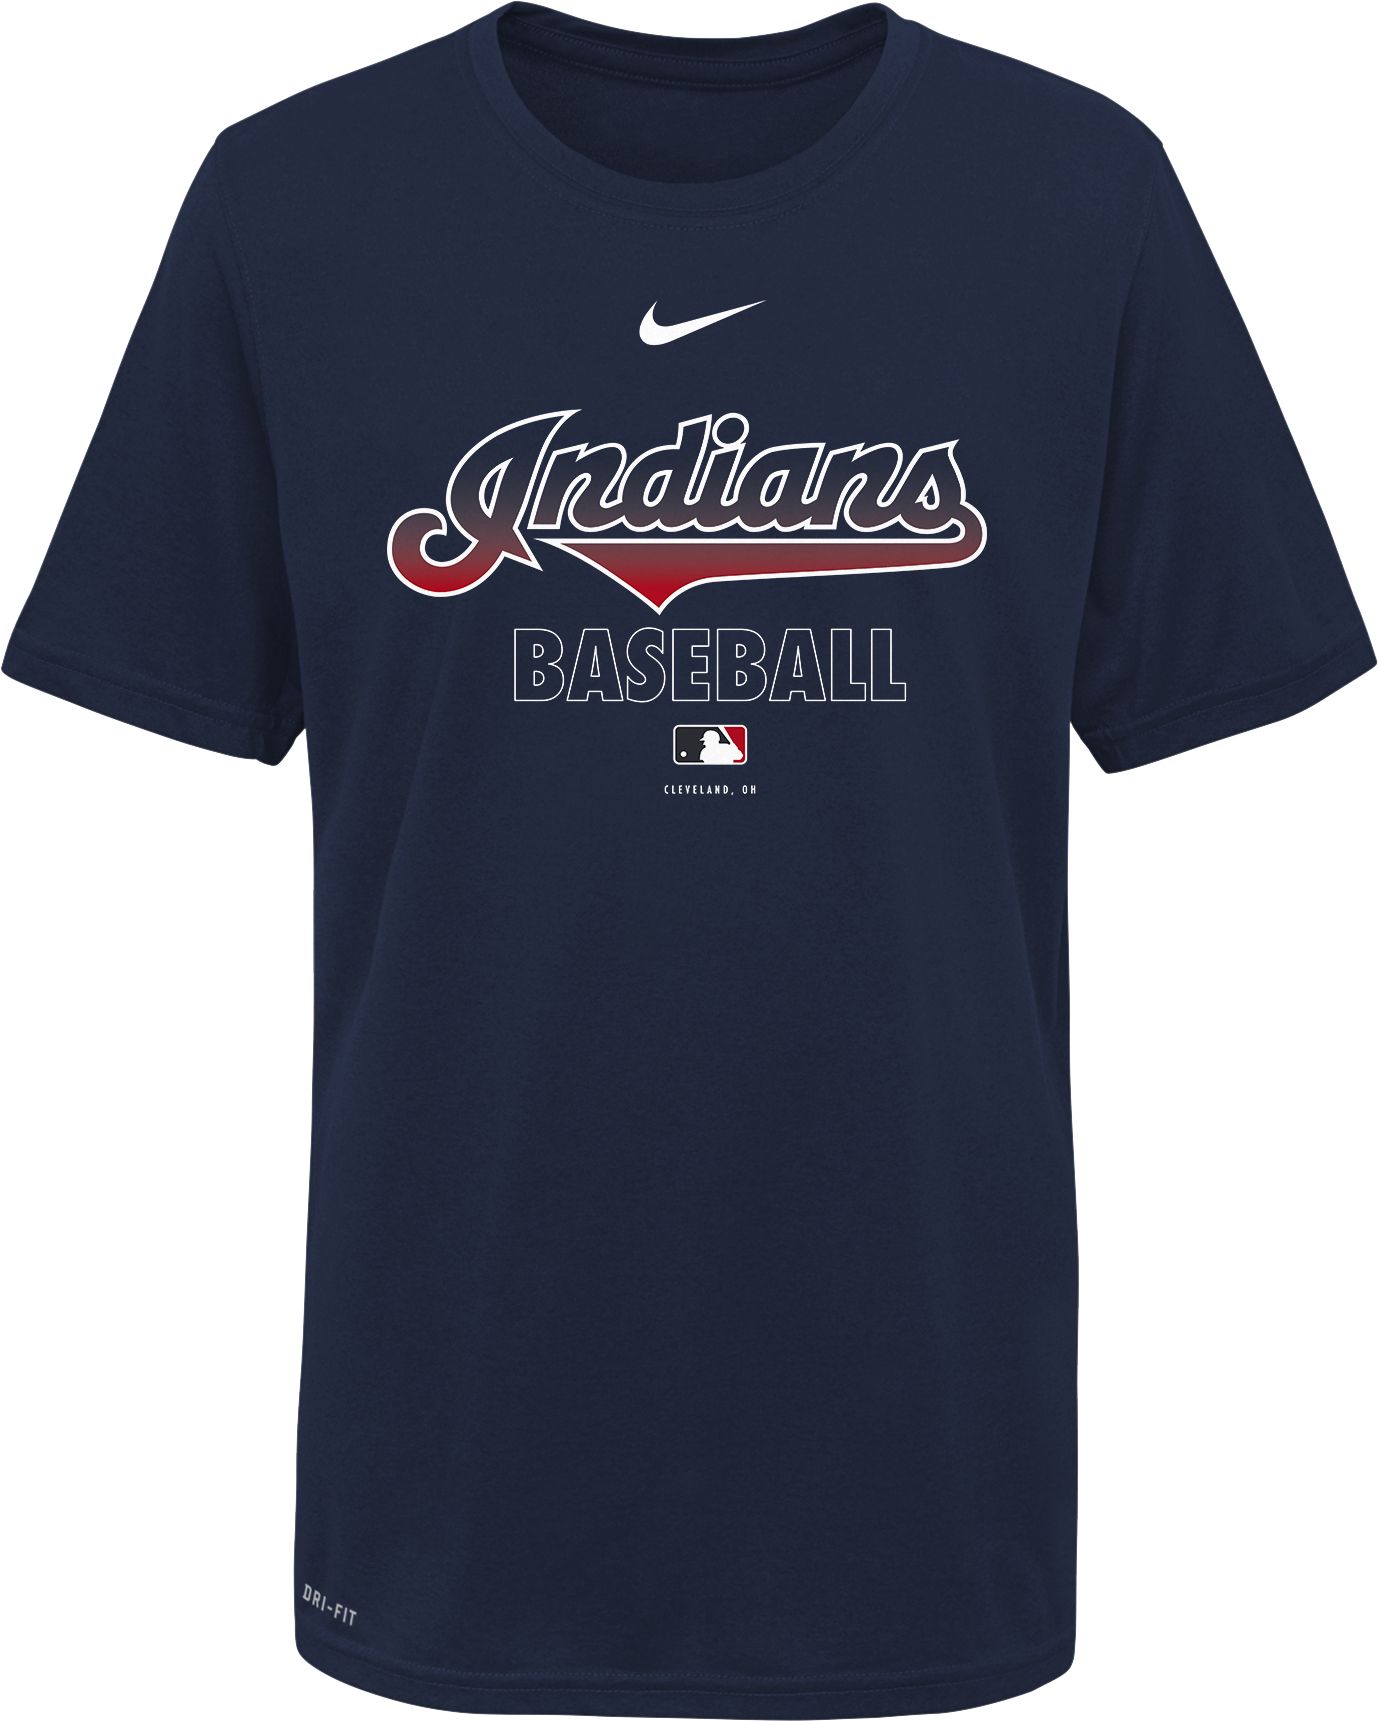 cleveland indians youth apparel